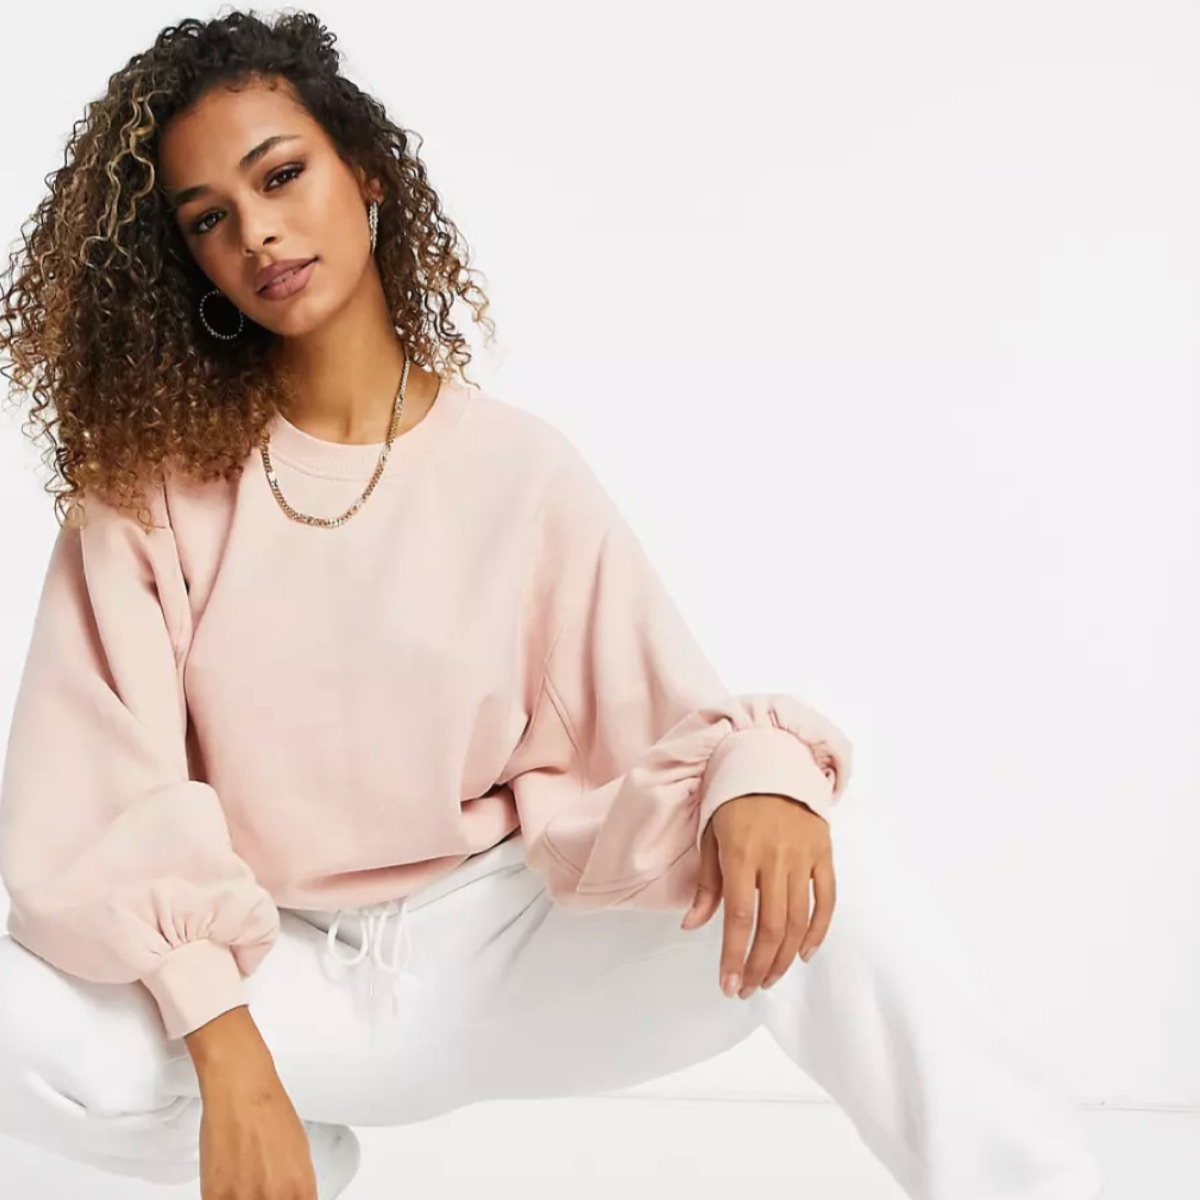 ASOS Sale & Outlet Deals: Save Up to 86% on UGG, Free People & More